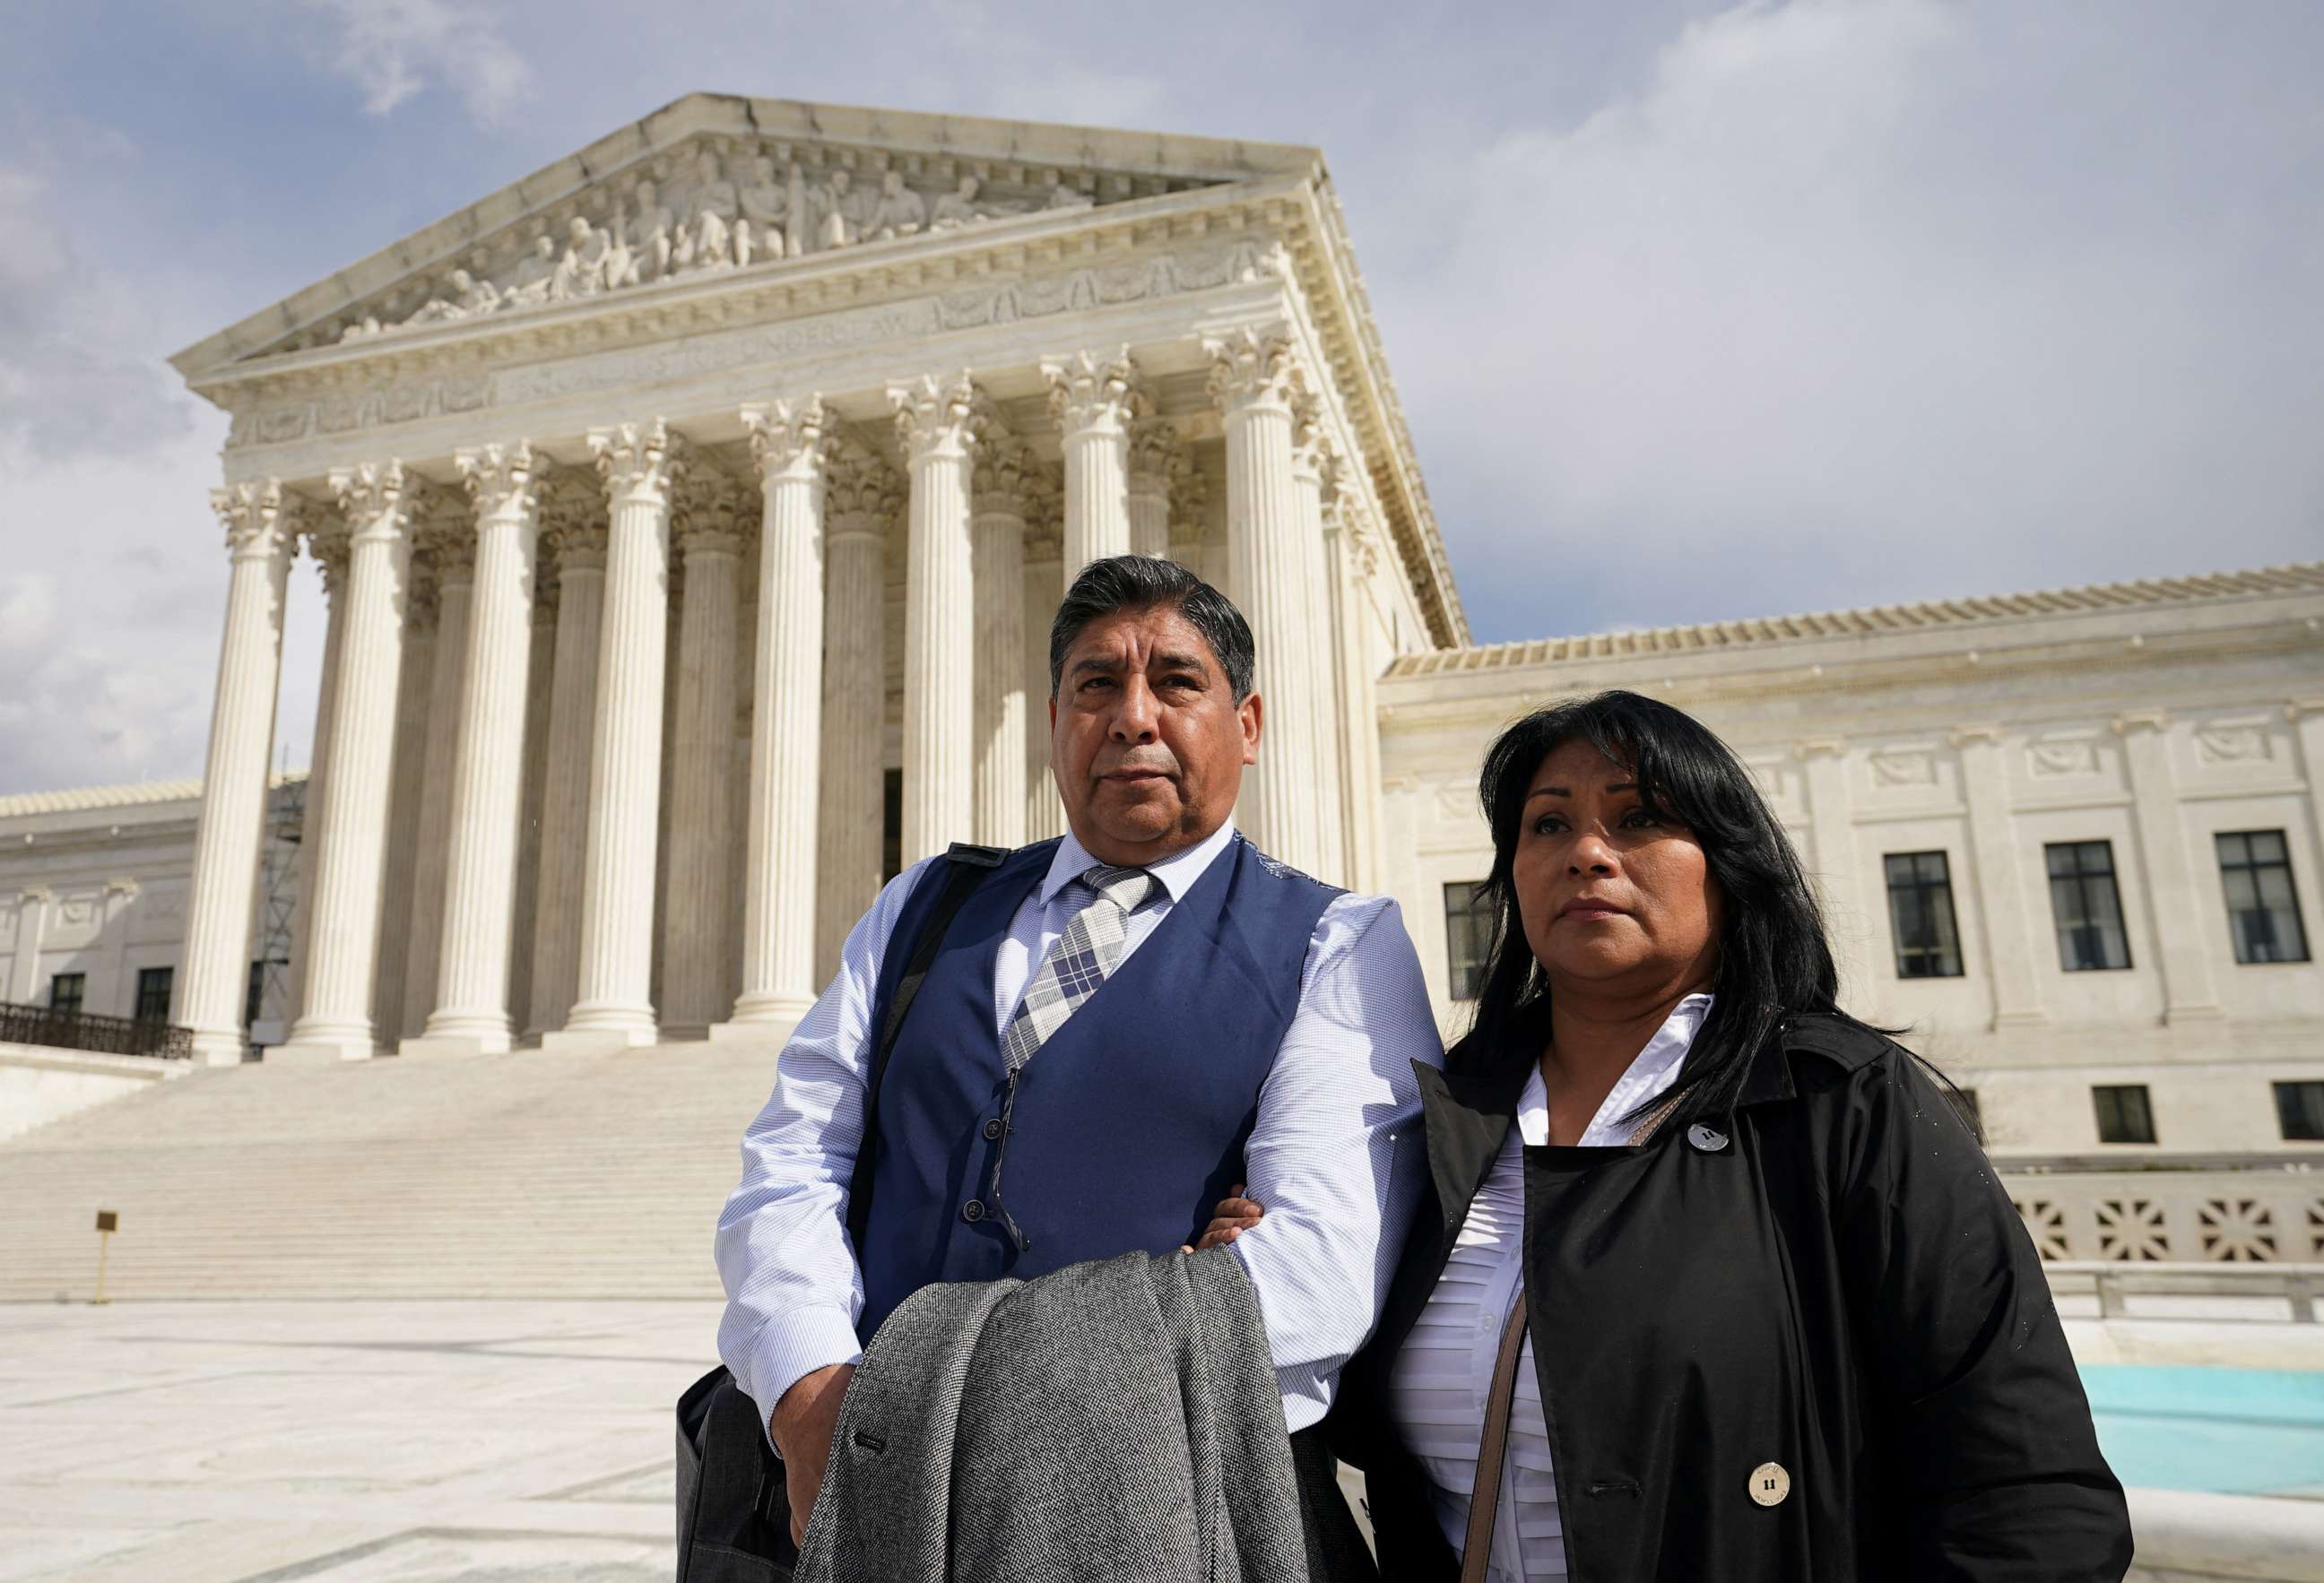 PHOTO: Beatriz Gonzalez and Jose Hernandez, mother and stepfather of Nohemi Gonzalez who was fatally shot in the 2015 Paris attacks, stand outside the U.S. Supreme Court after justices heard arguments in Gonzalez v. Google in Washington, Feb. 21, 2023.